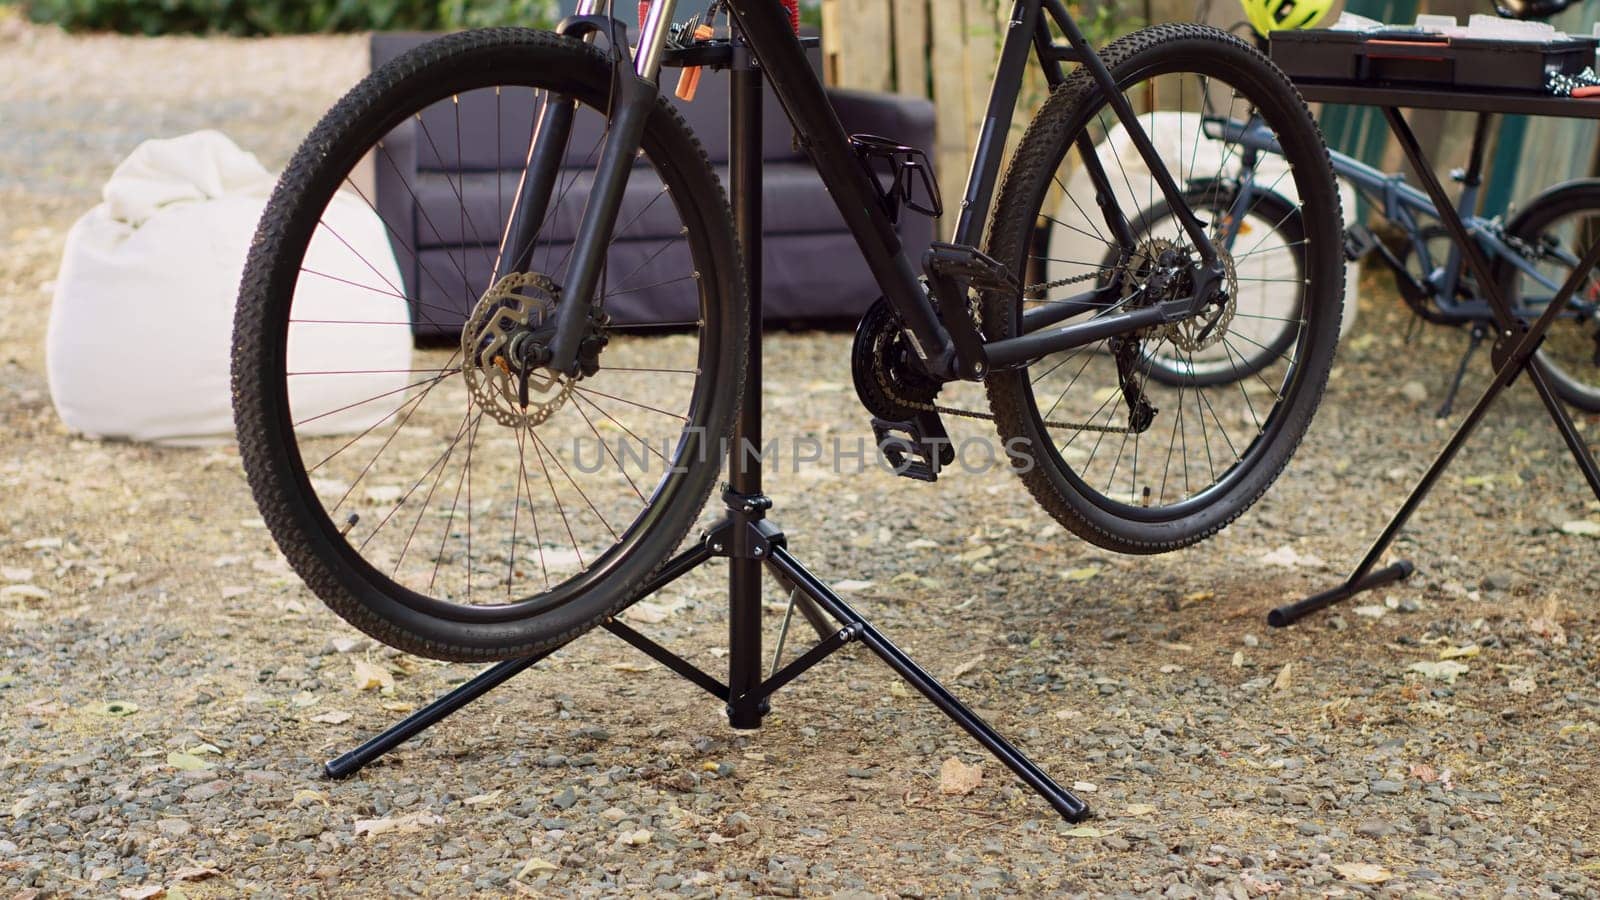 Bicycle stationed on repair-stand by DCStudio